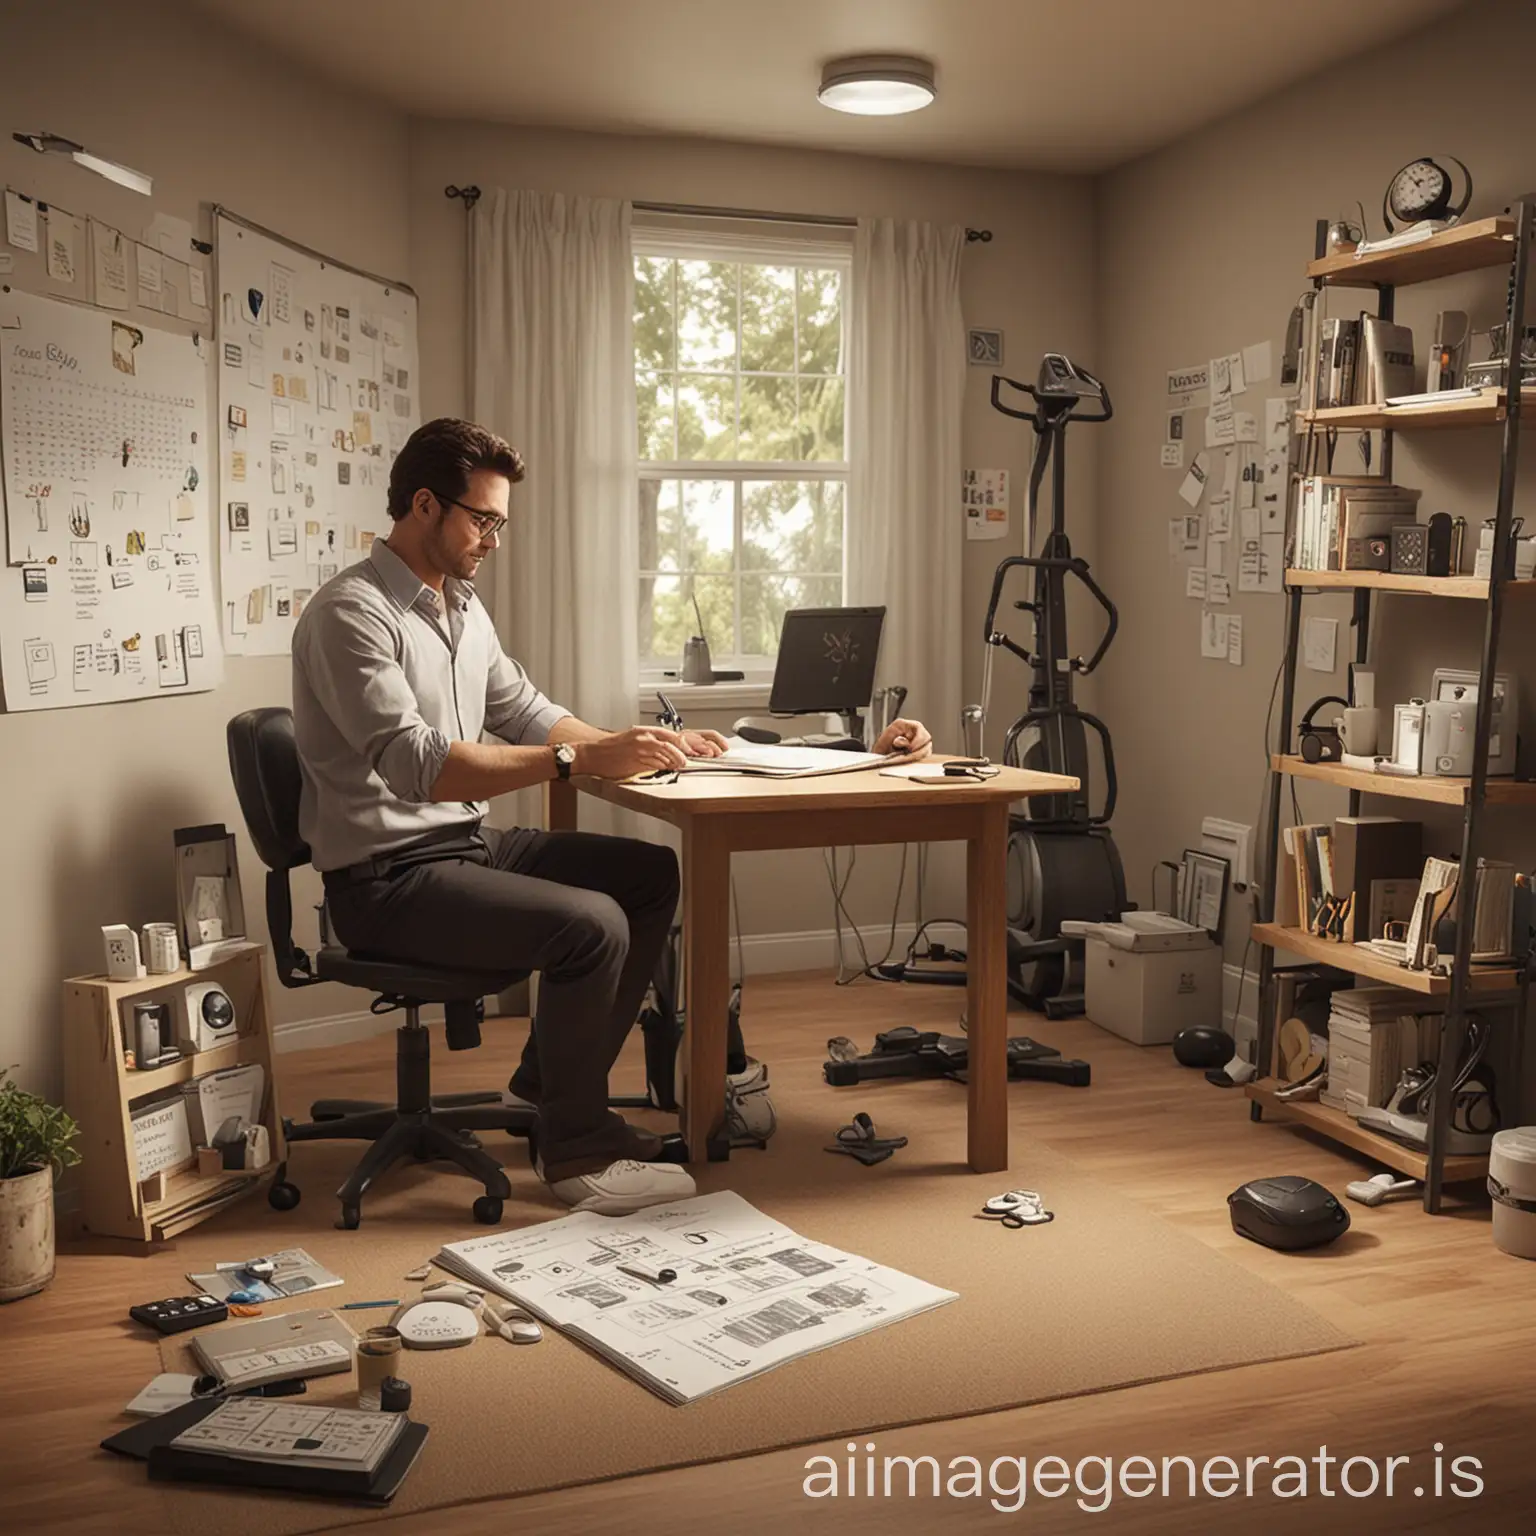 Man-Creating-Effective-Habits-in-Modern-Home-Office